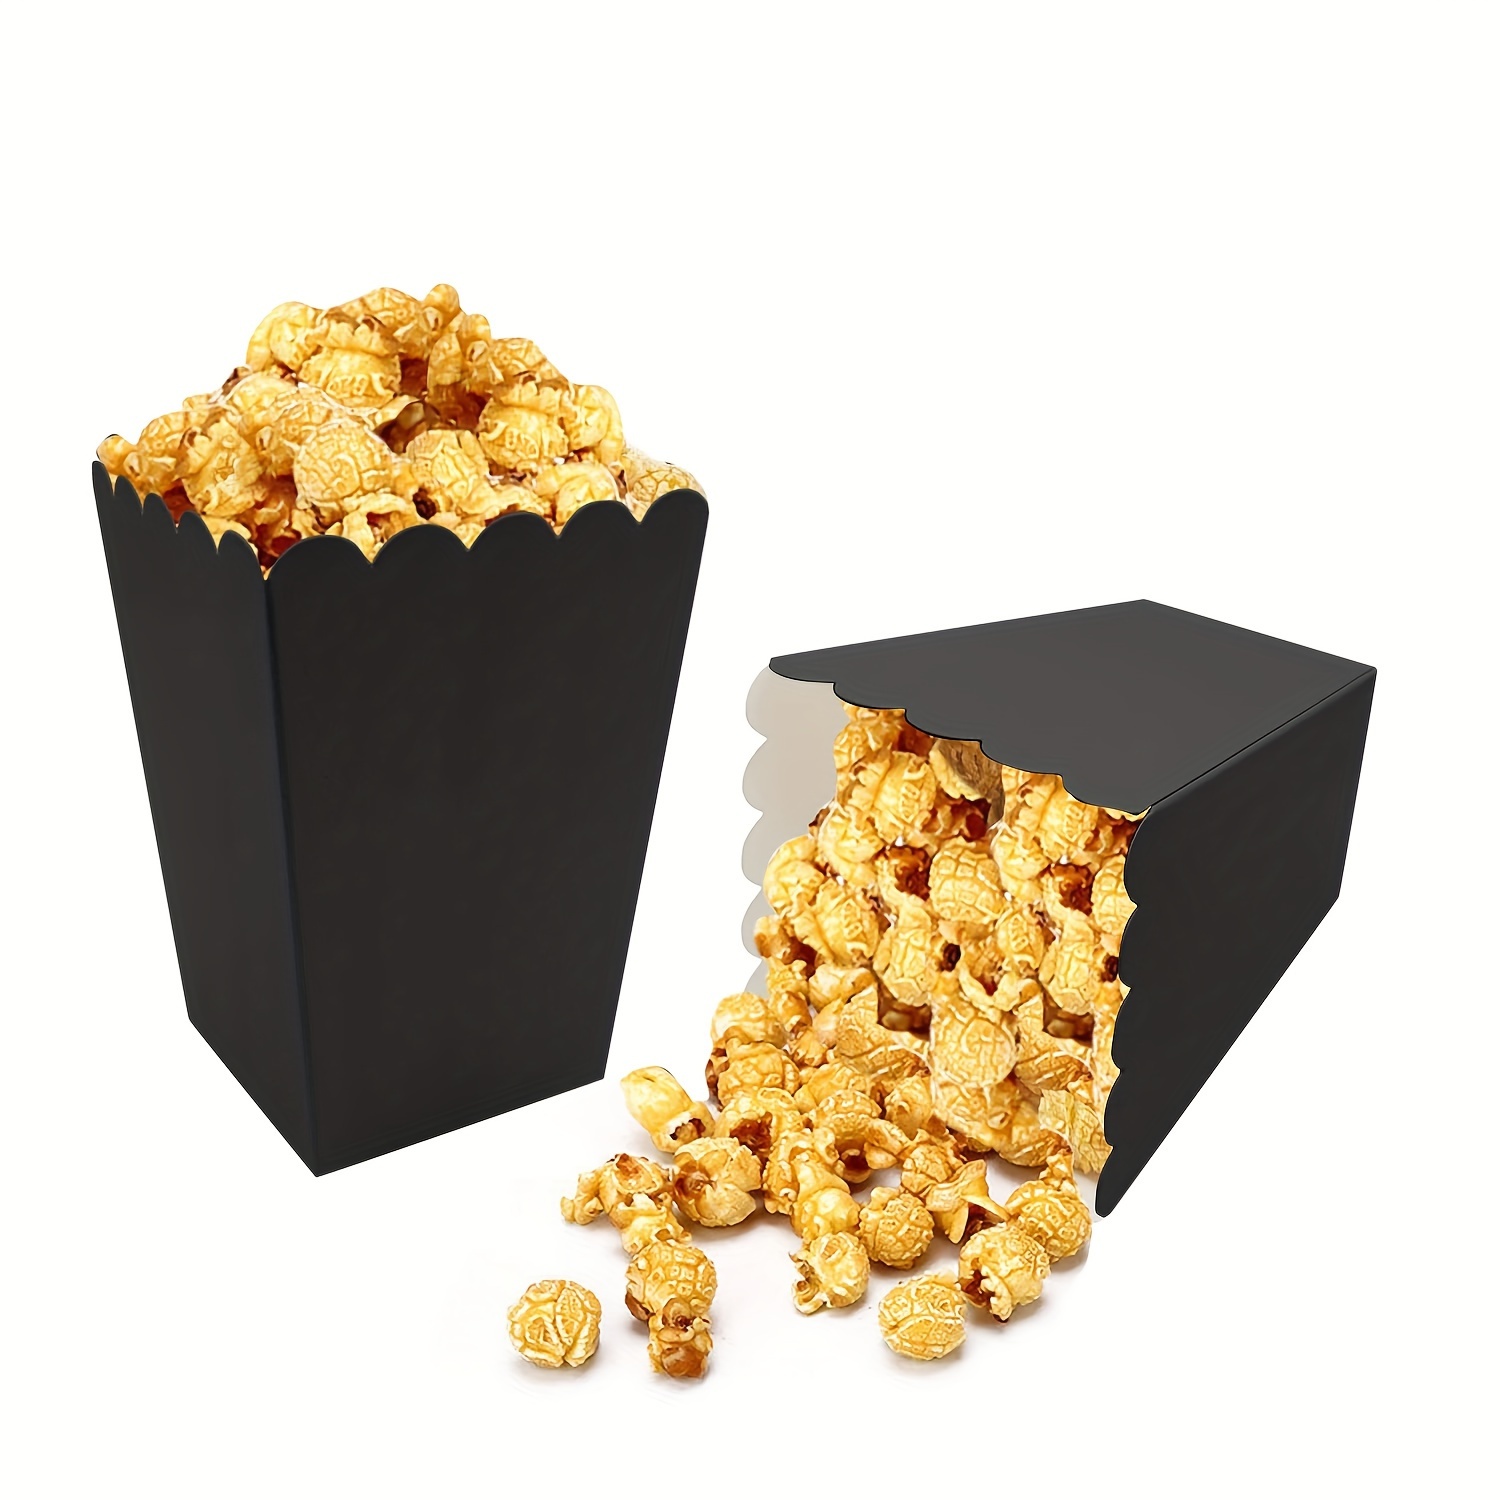 

12pcs, Popcorn Boxes, Mini Paper Popcorn Box, Cardboard Popcorn Container For Party, Disposable Snack Candy Popcorn Bags, Popcorn Holder For Birthday Wedding Decoration